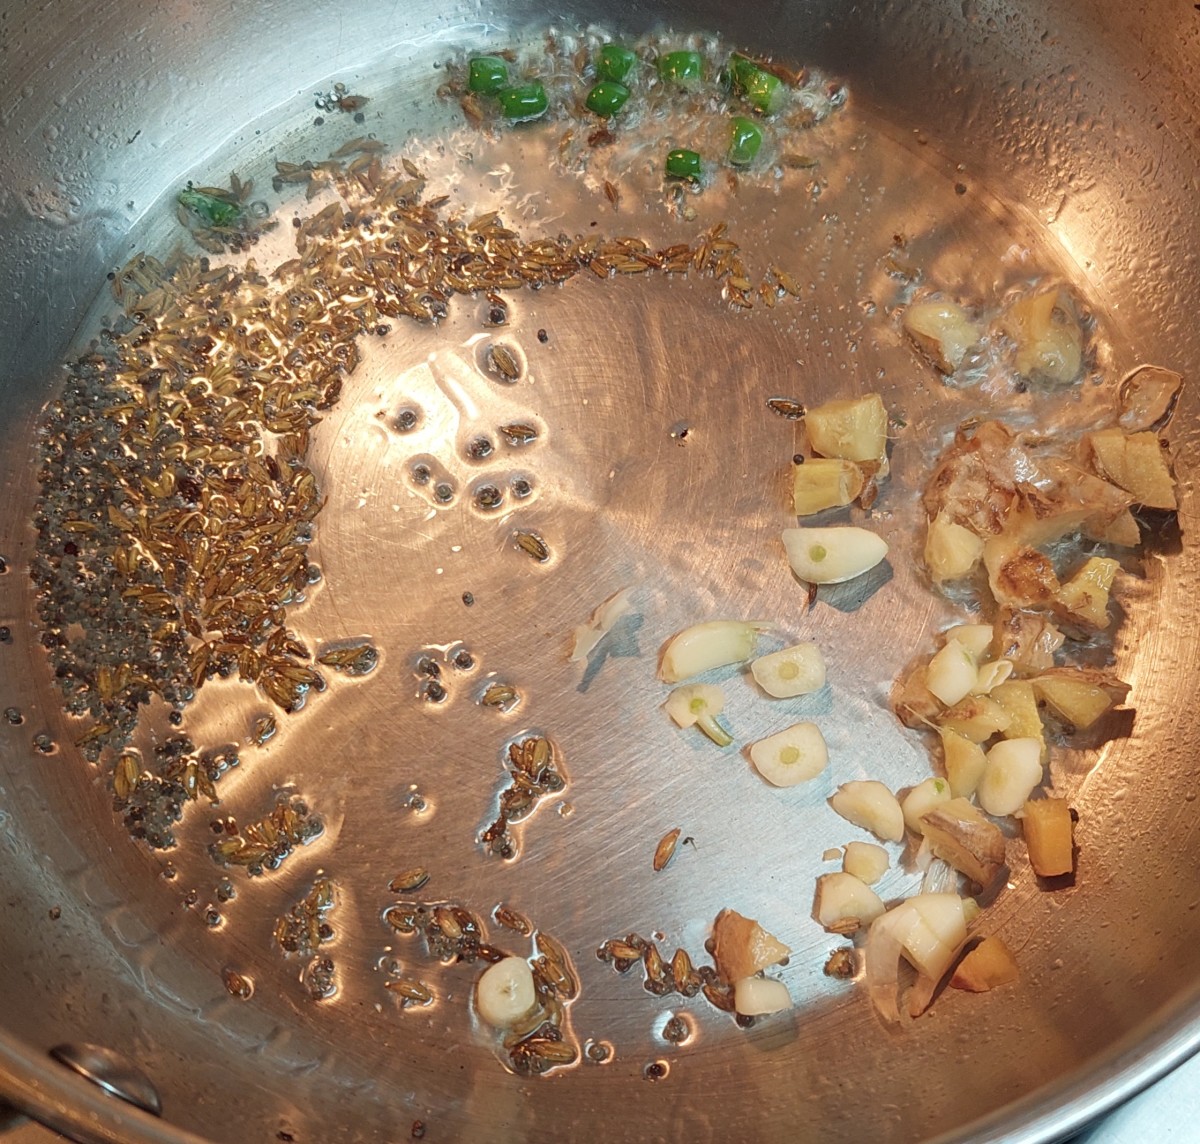 Heat 1 tablespoon of cooking oil in a pan. Add 1/2 teaspoon of mustard seeds and 1 teaspoon of cumin seeds. Let them splutter. Add chopped ginger, garlic and green chilies. Fry for a minute.